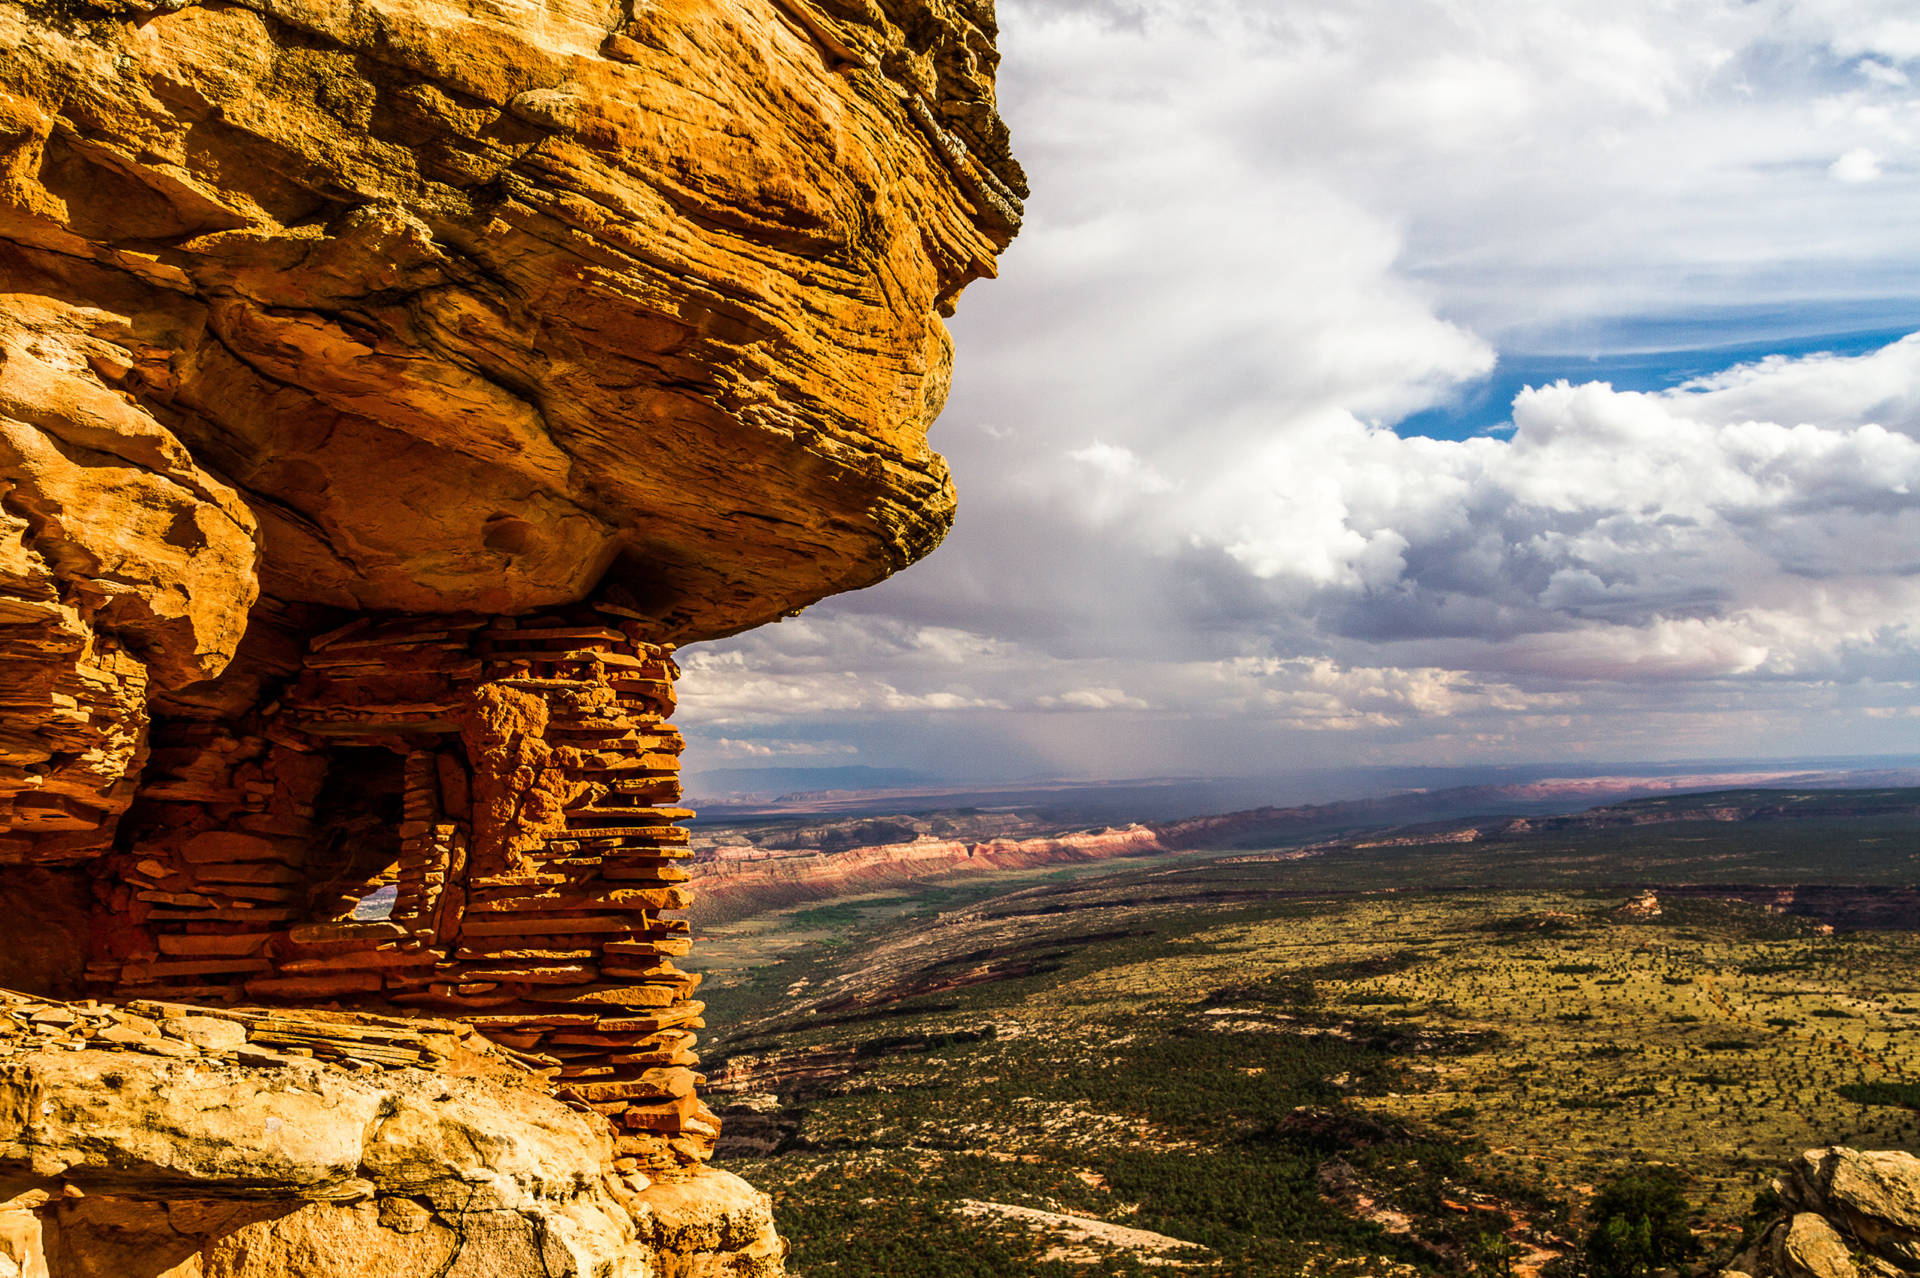 A prehistoric granary overlooking Cedar Mesa, a site inside the newly created Bears Ears National Monument in Utah that is sacred to many Native American tribes. Natives still hunt and forage for food and medicine throughout the Bears Ears region. Josh Ewing/Courtesy of Bears Ears Inter-Tribal Coalition